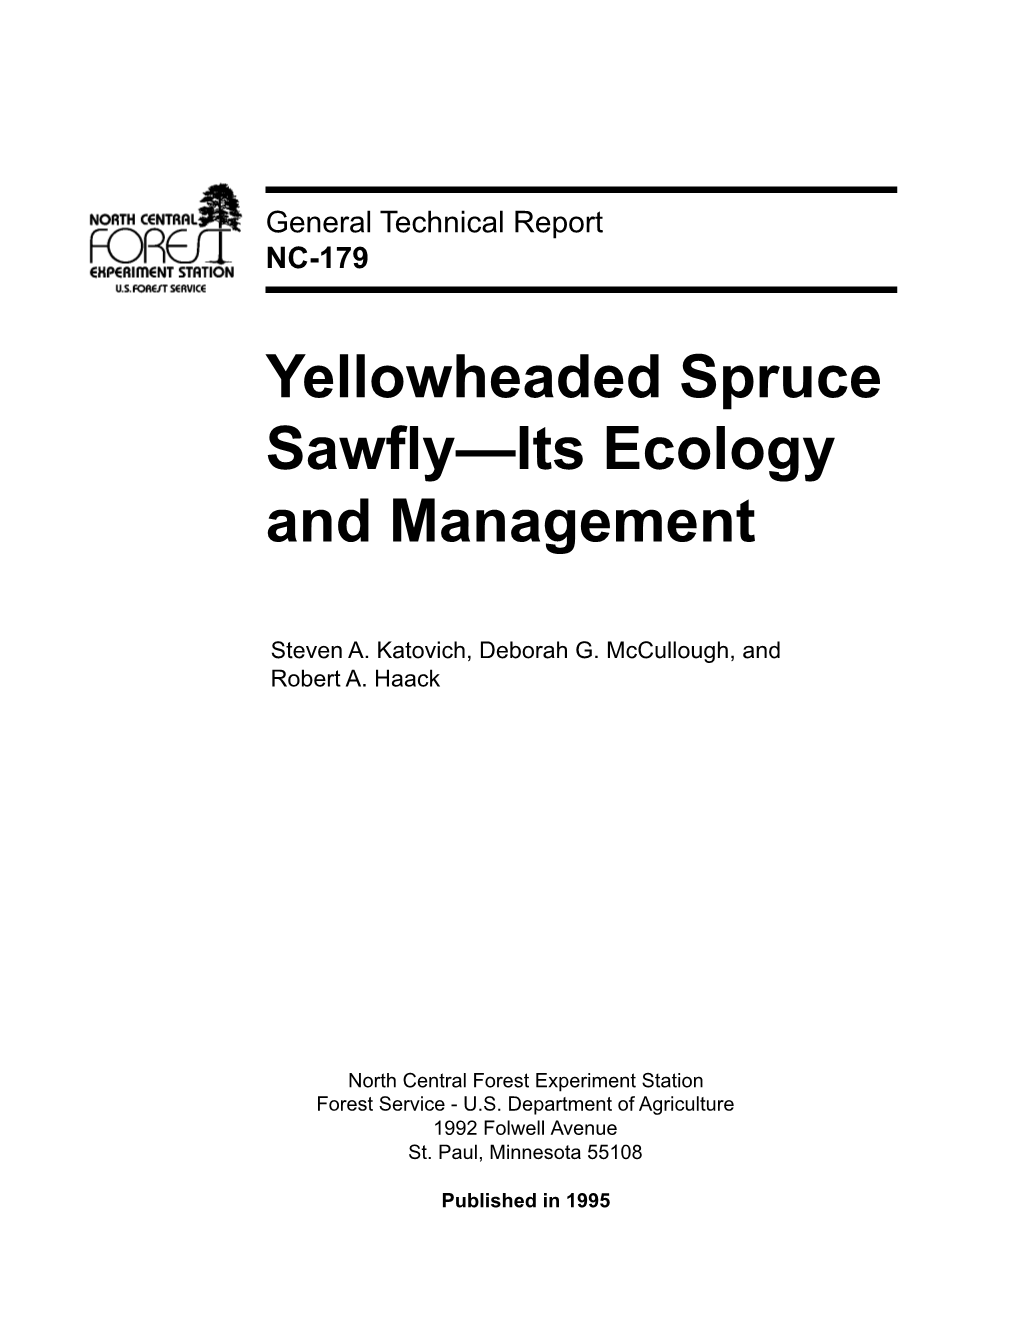 Yellowheaded Spruce Sawfly—Its Ecology and Management